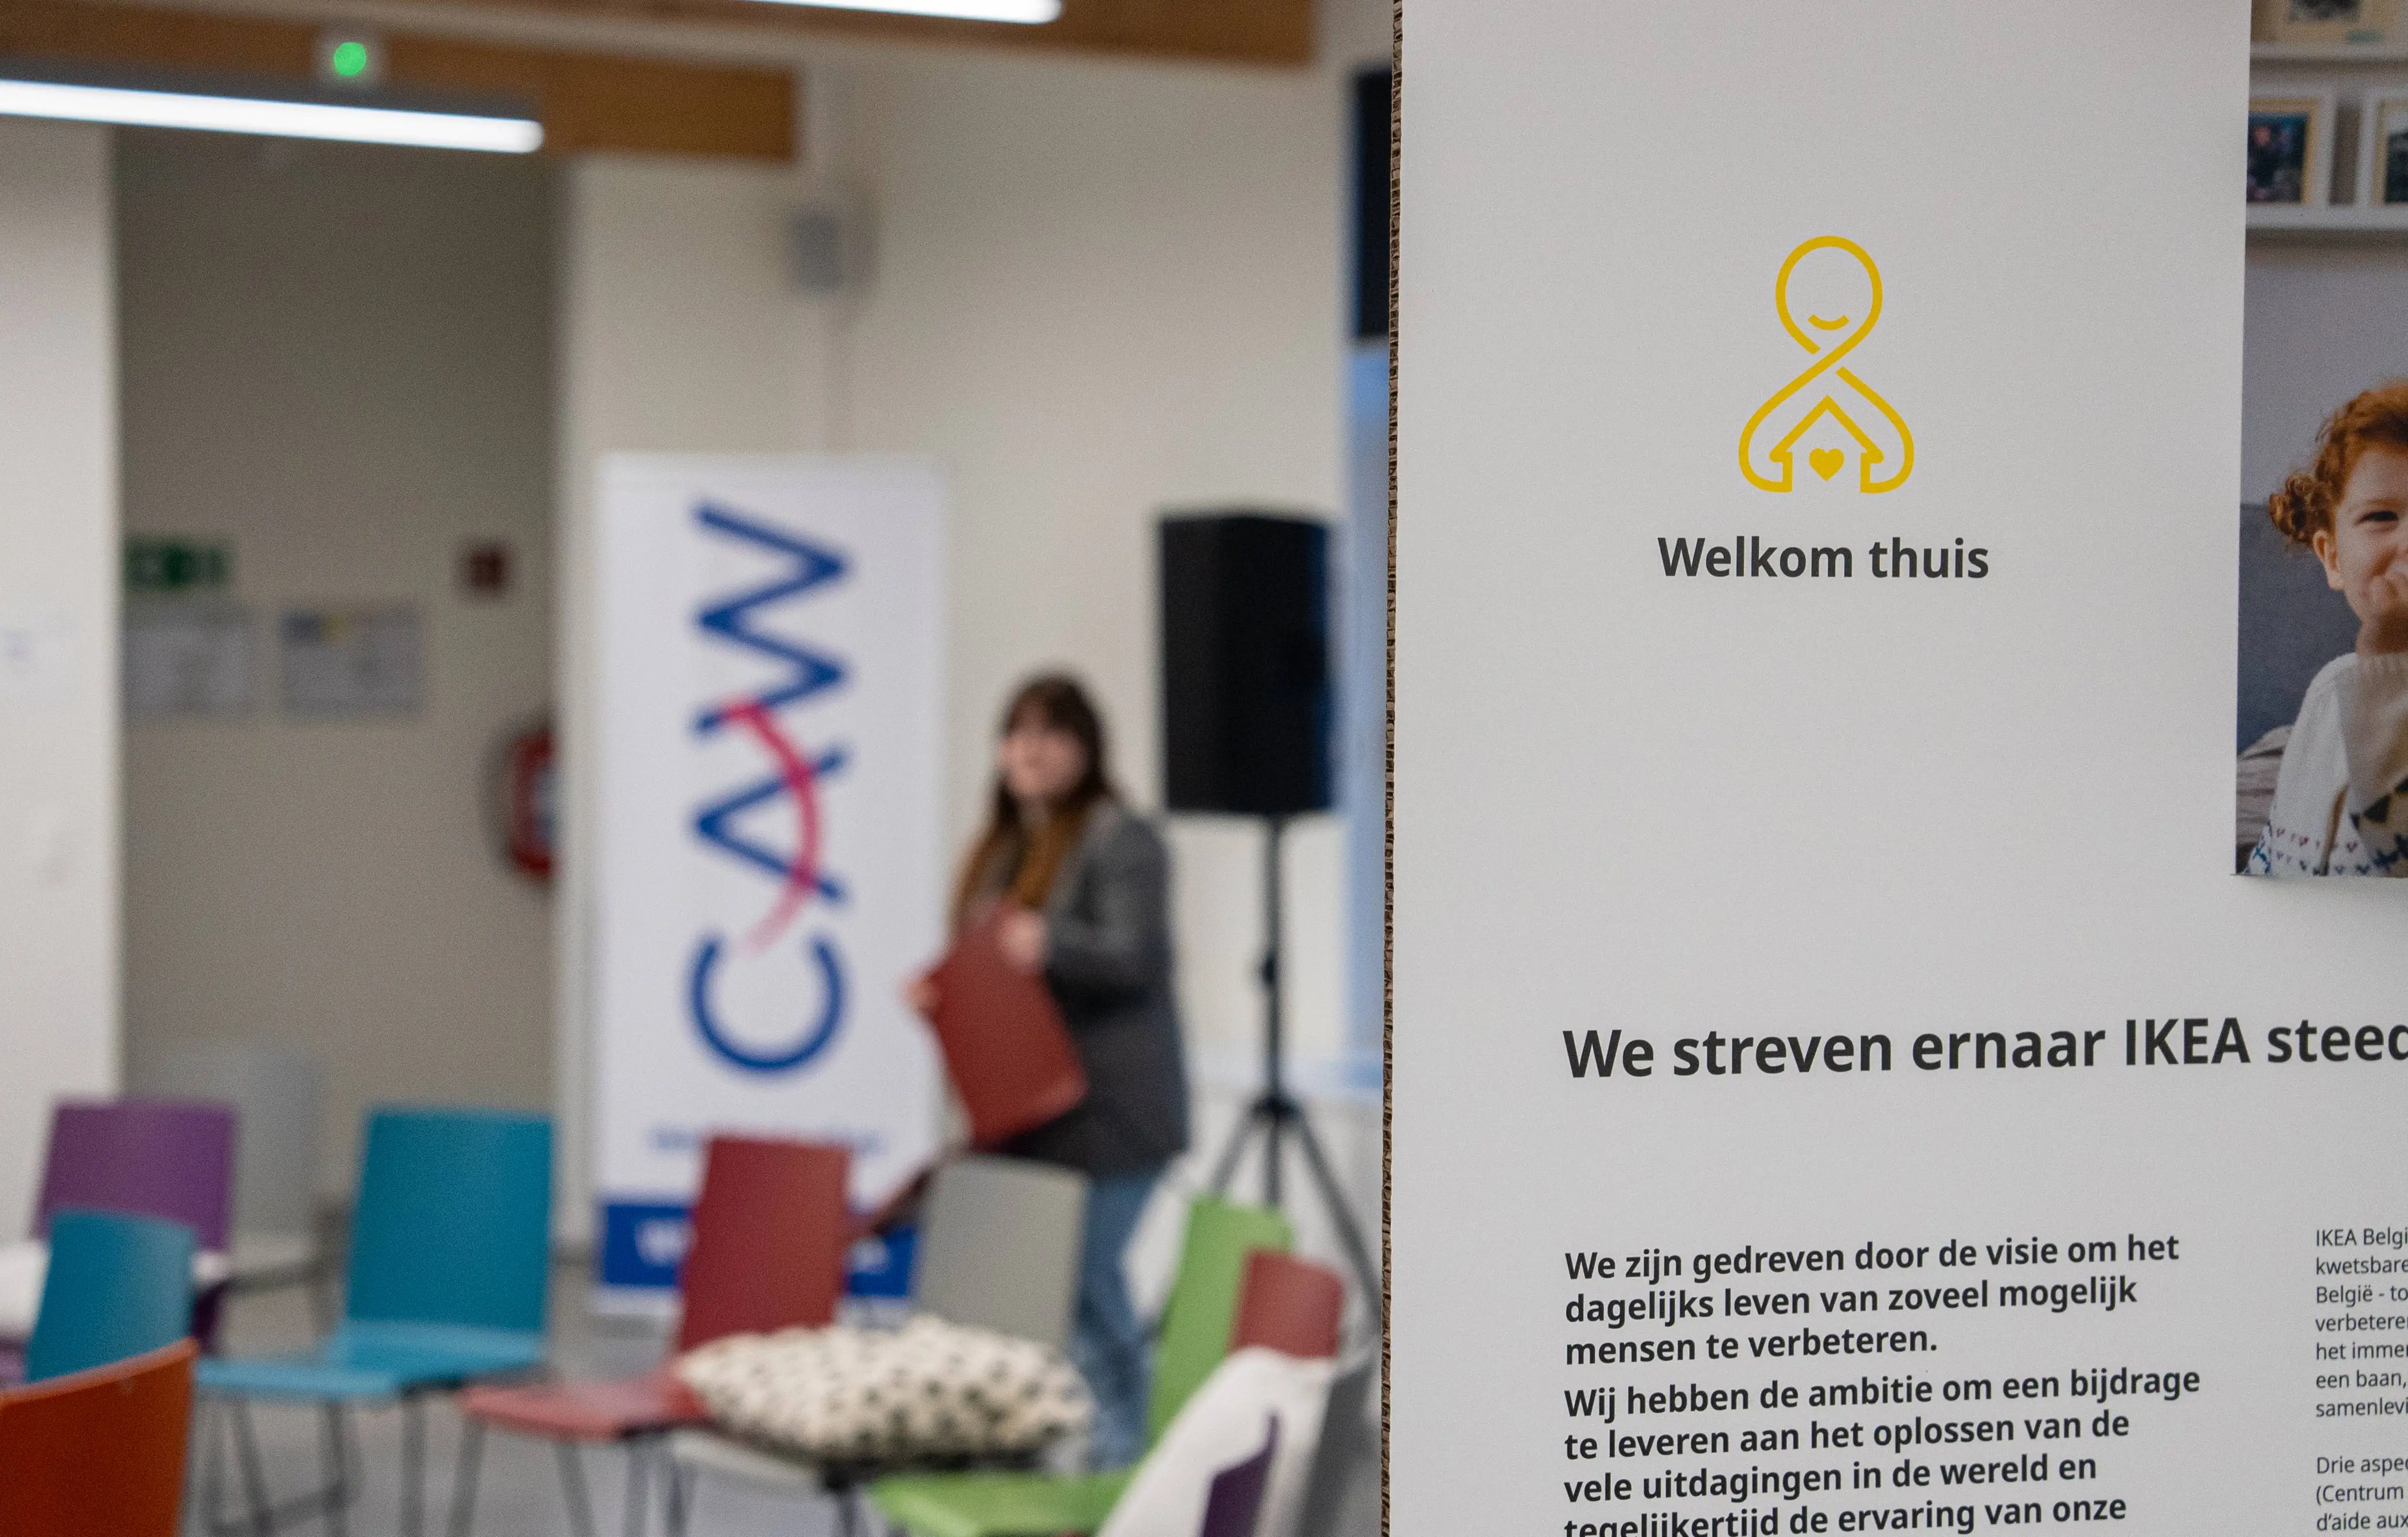 Event decoration with the words ‘Welkom Thuis,’ which is the name of the event project, and in the background of the image, an empty room before the arrival of participants